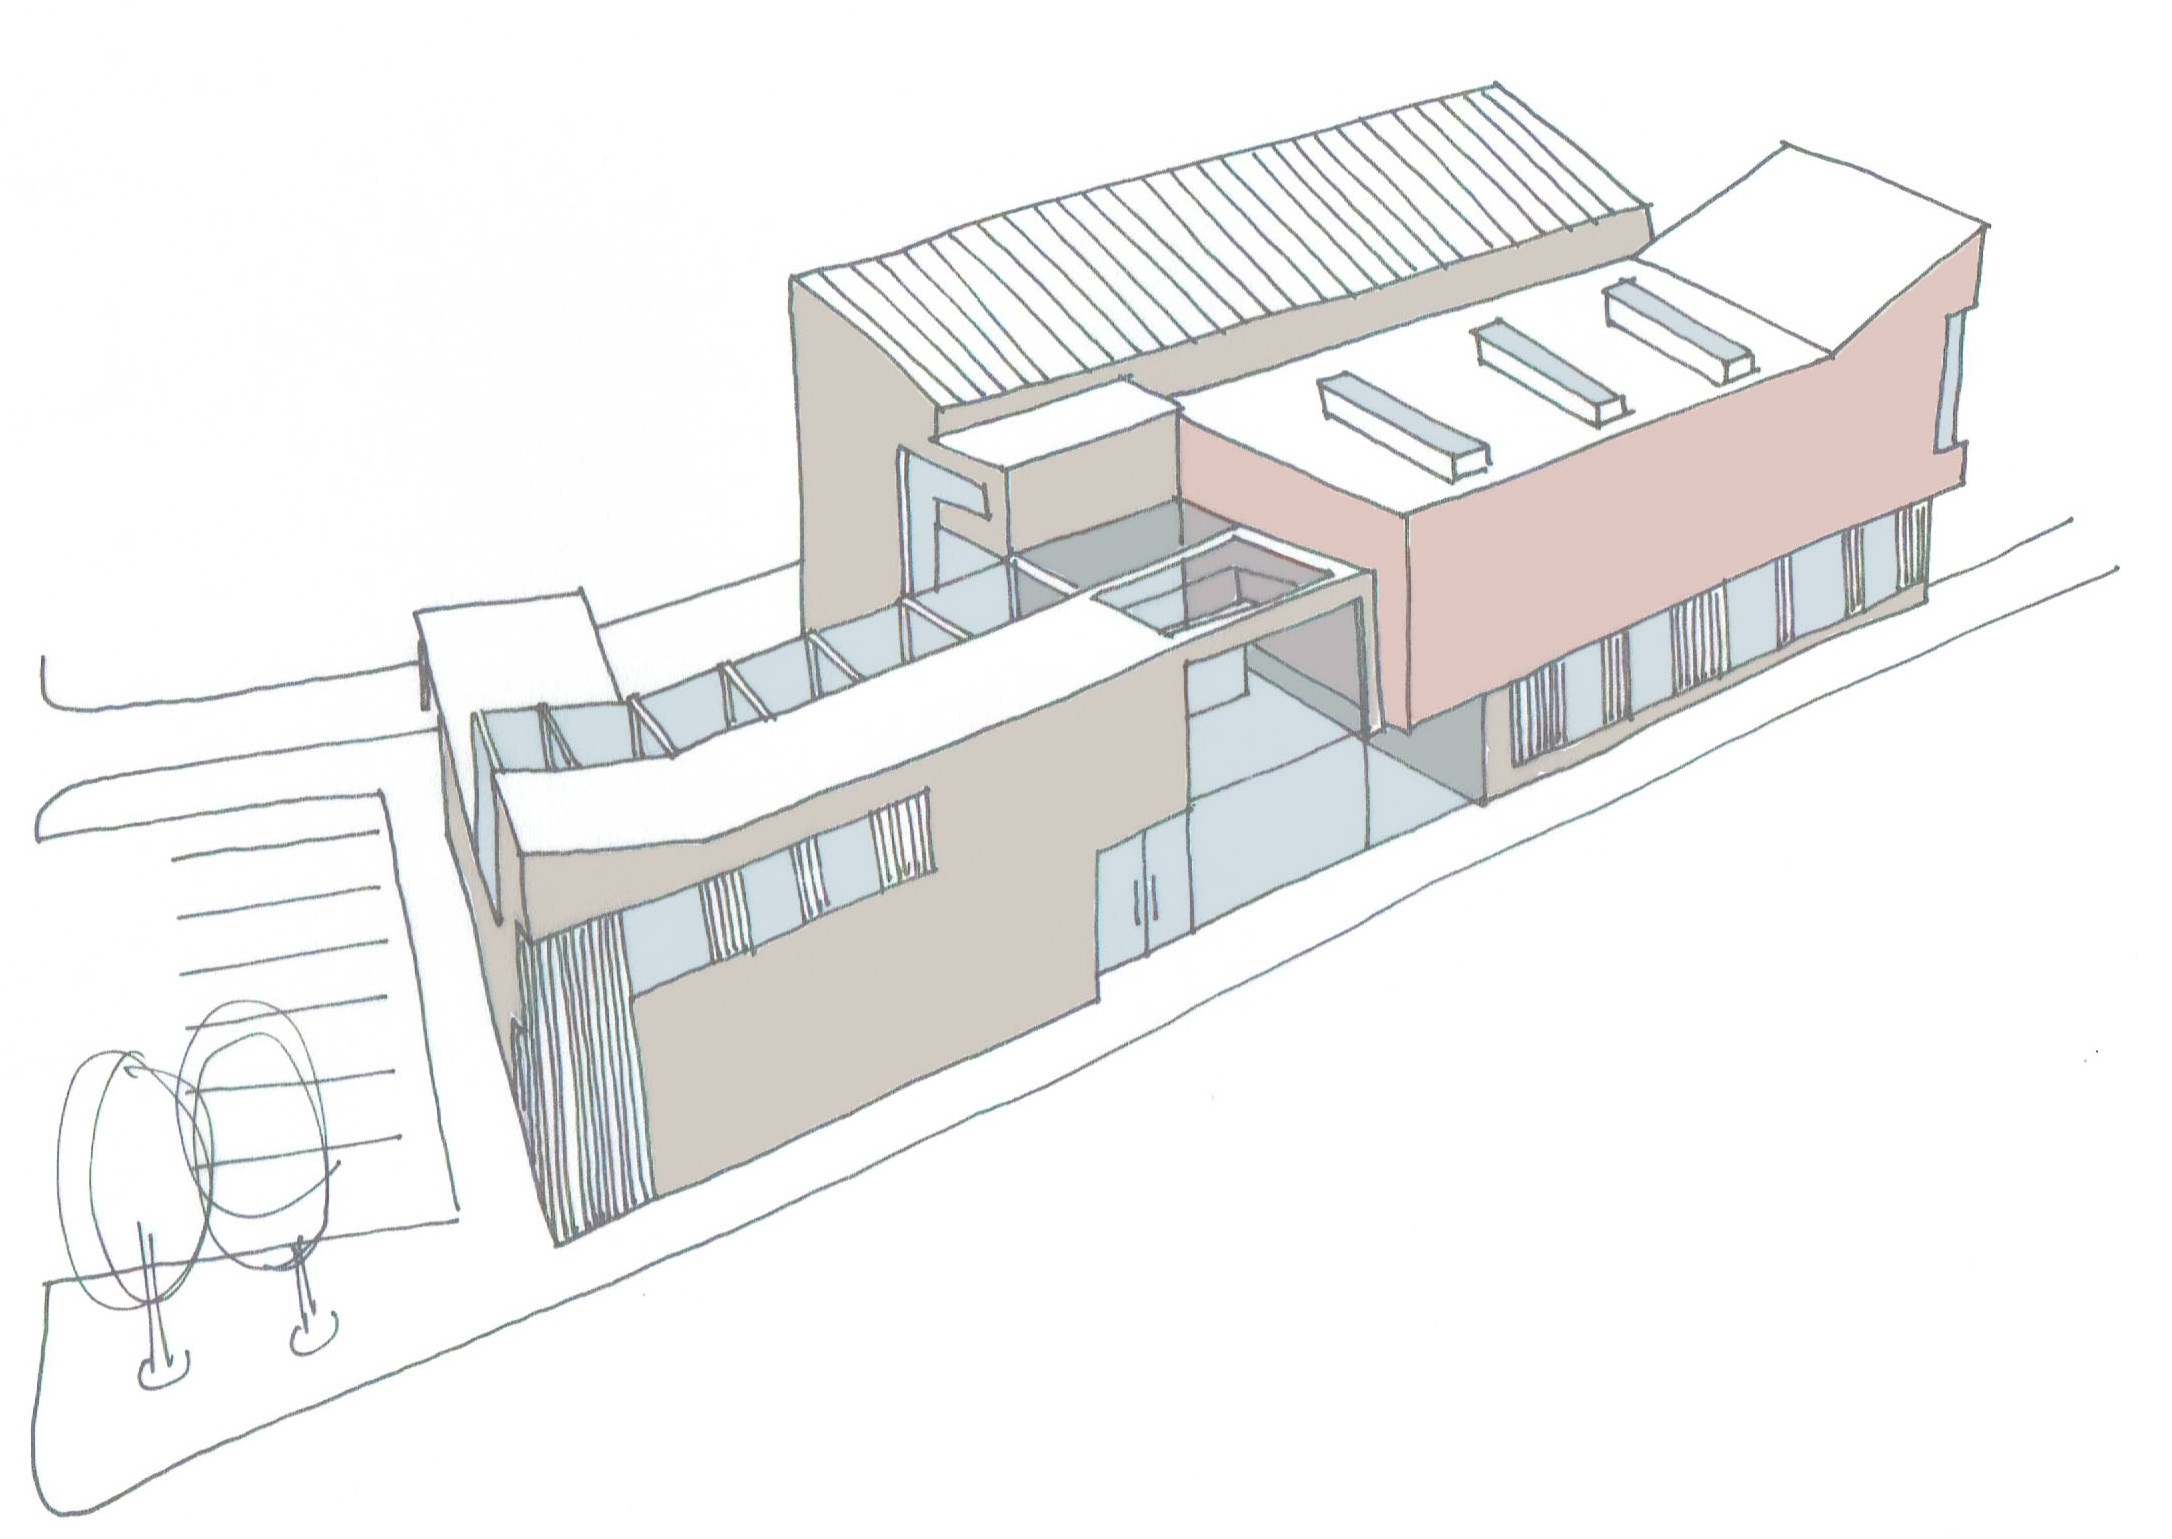   Newcastle Bangladeshi Association Multicultural Centre   Following extensive consultation with more than 300 members of the Bangladeshi community, Grace Choi Architecture carried out an in depth analysis of context, brief development and the study 